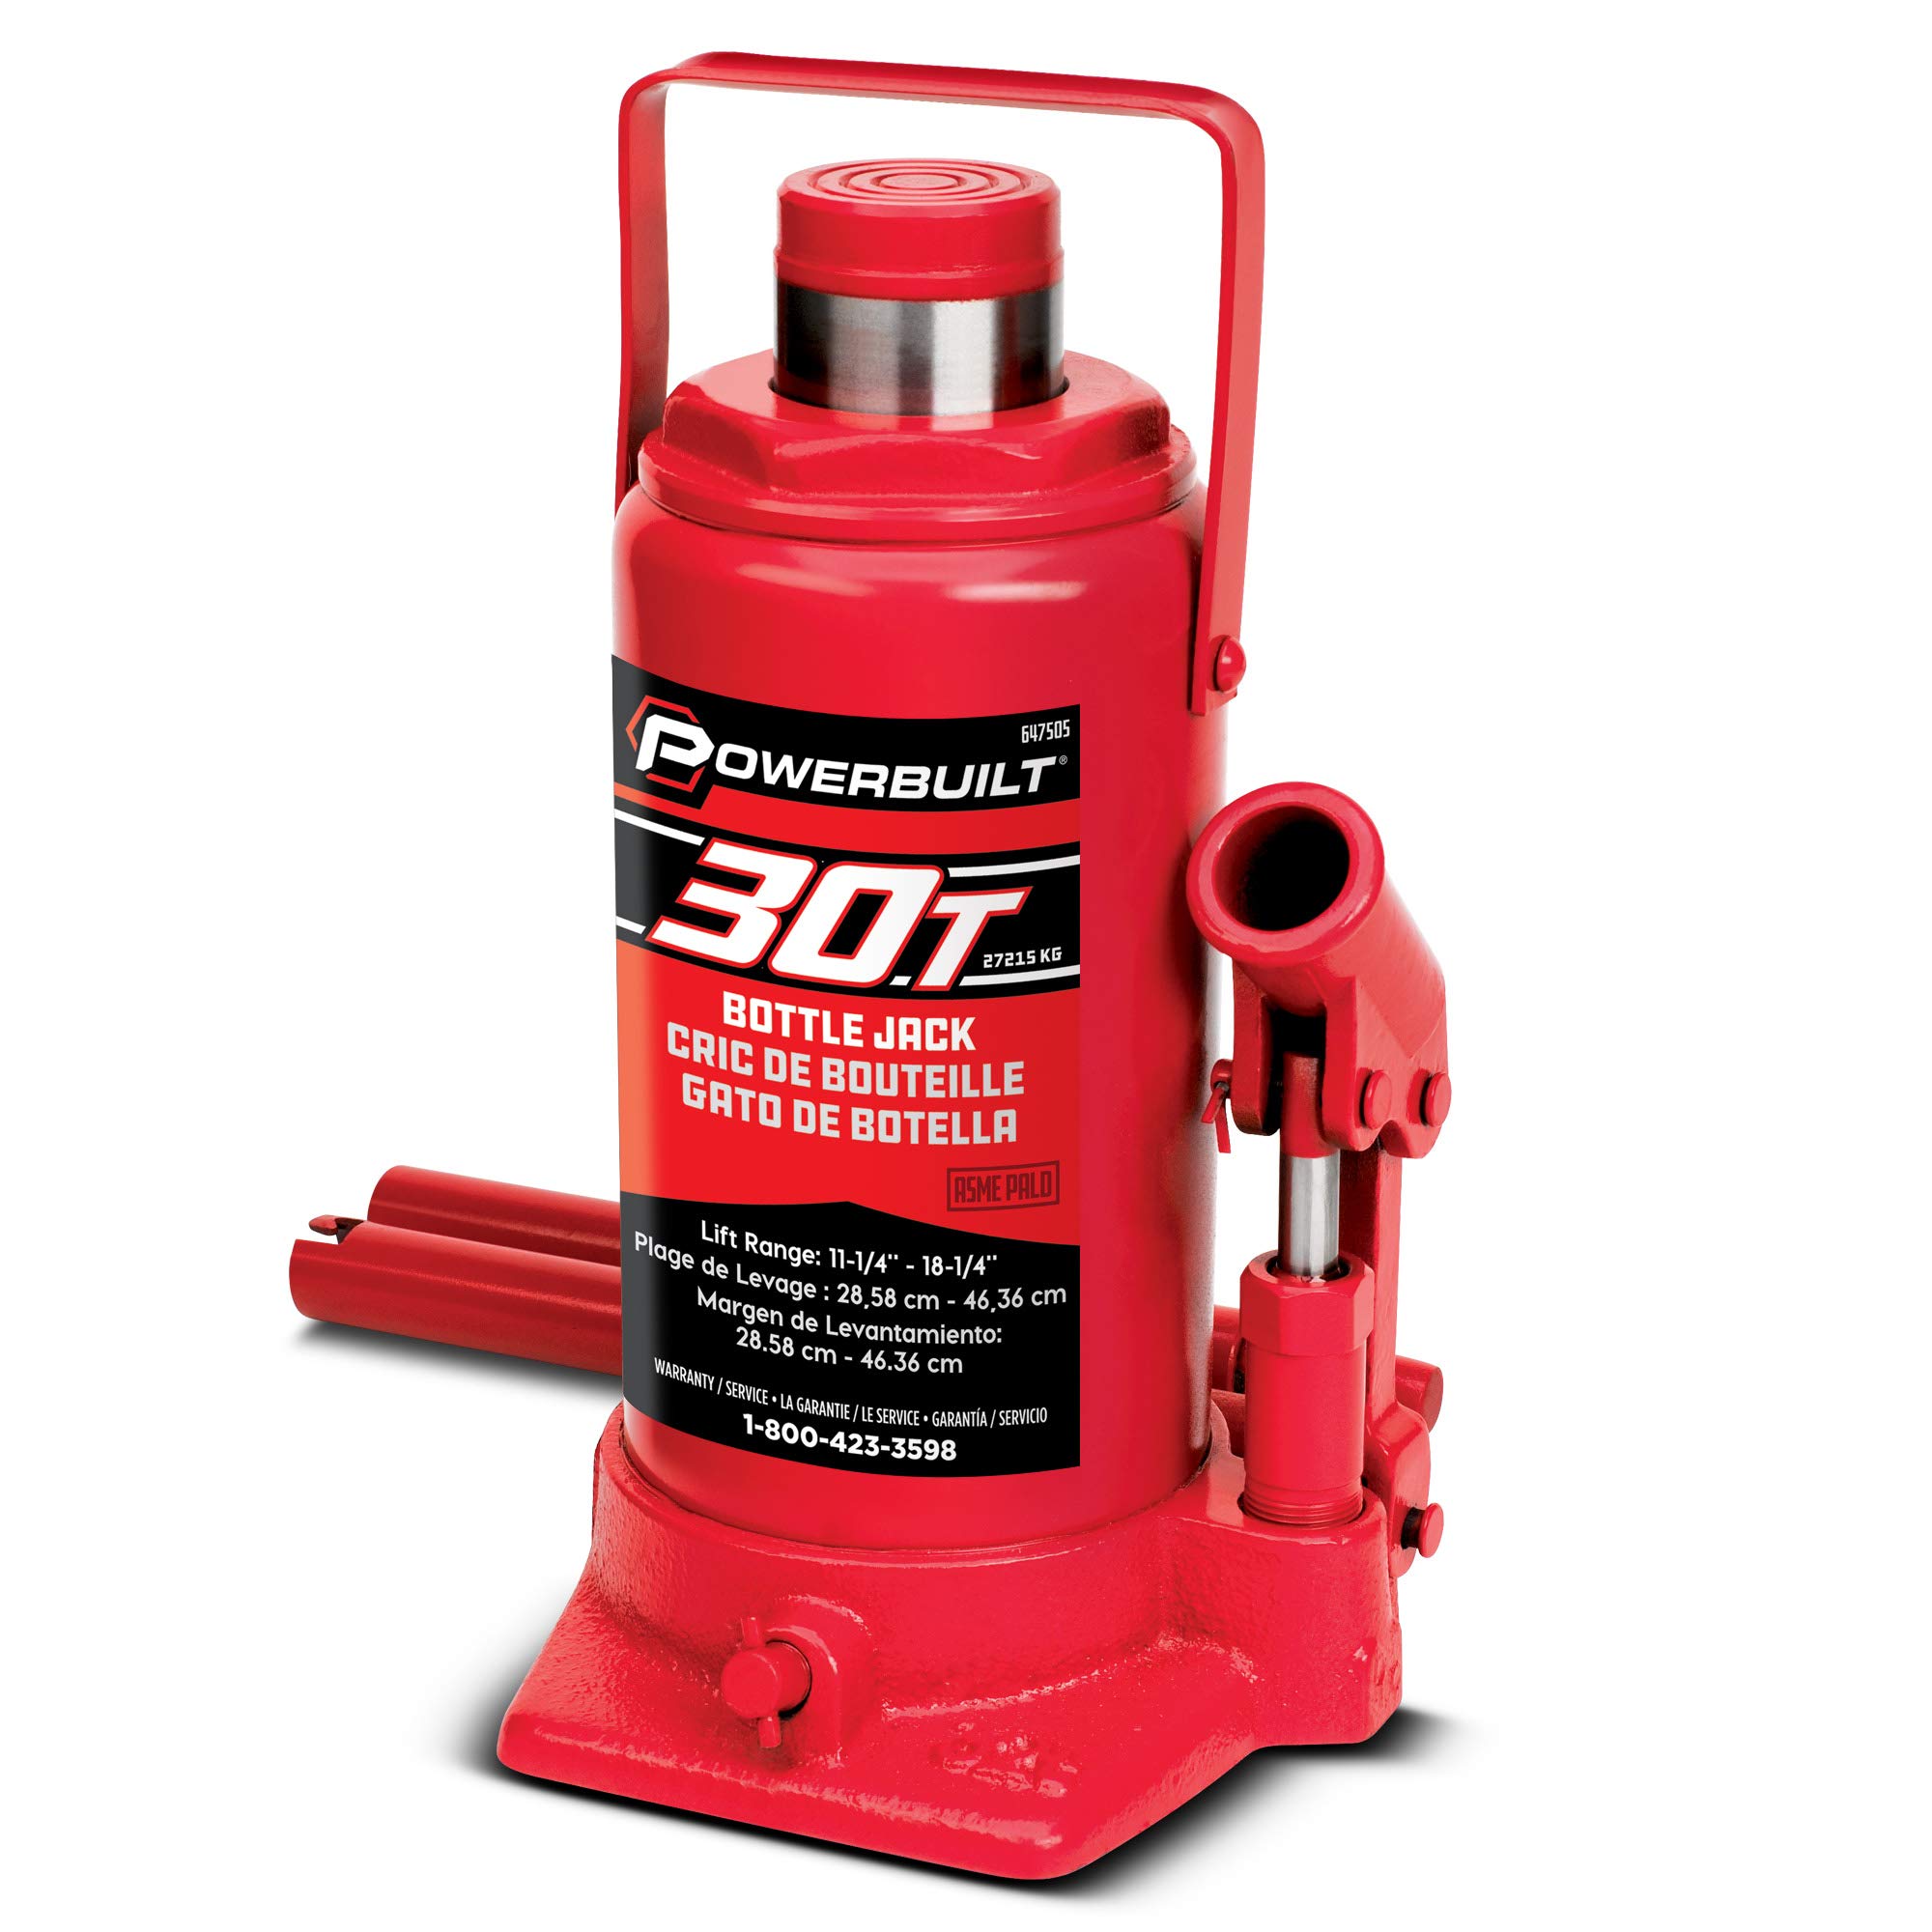 Powerbuilt Bottle Jack, 30 Ton Capacity, Heavy Duty 60000 Pounds Hydraulic Vehicle Lift with Stable Base - Red 647505